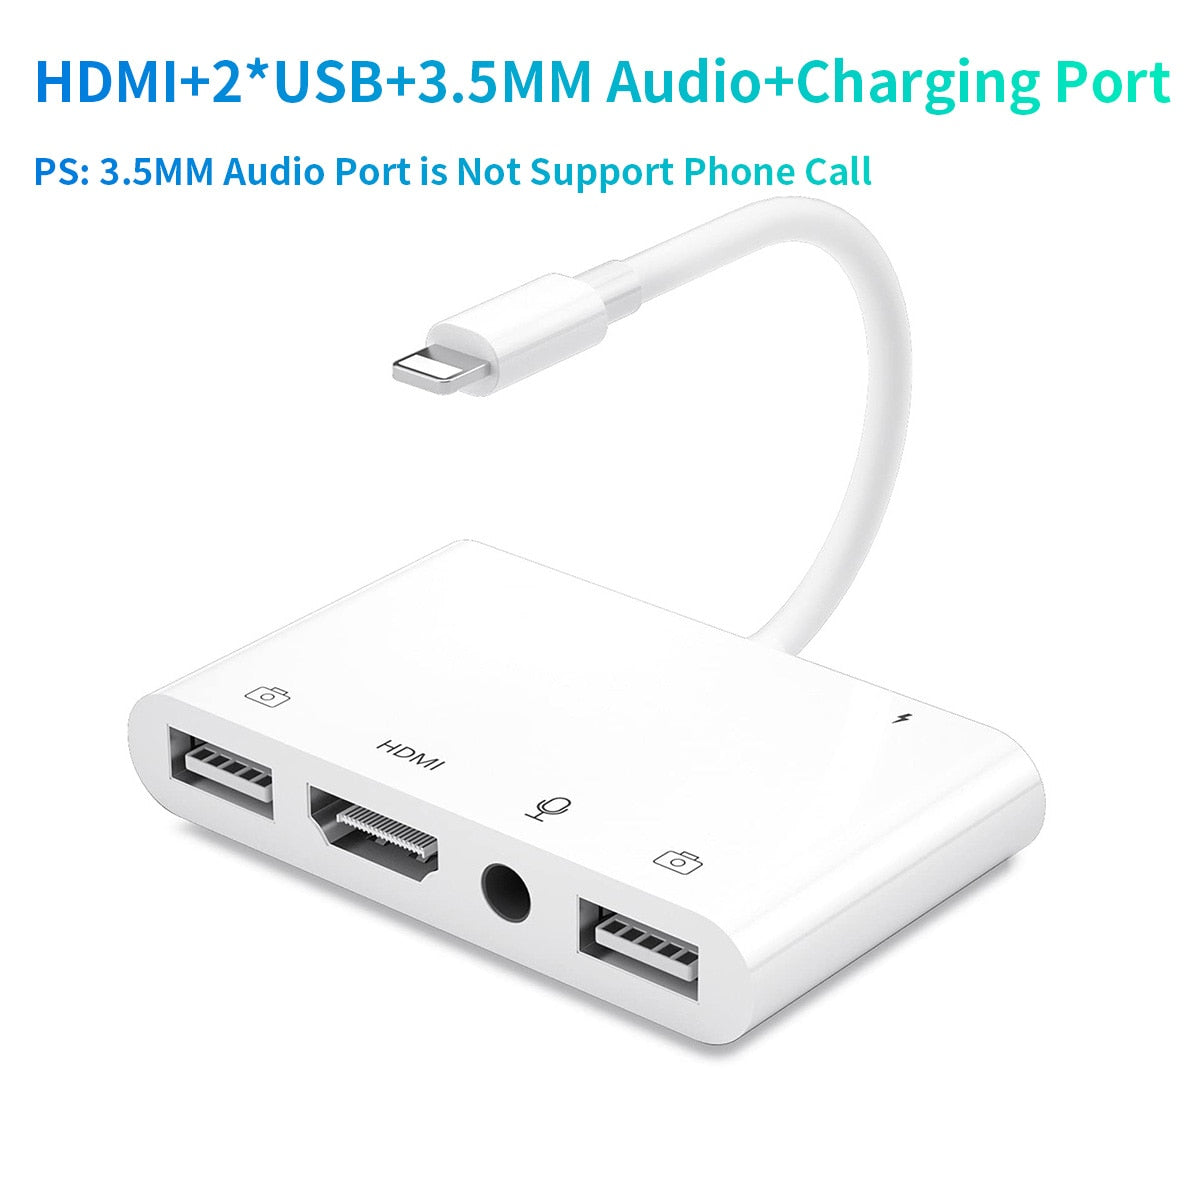 Lightning to HDMI Adapter for iPhone iPad to TV Dual USB OTG Adapter iPhone Microphone Adapter for Live-Streaming with Charging